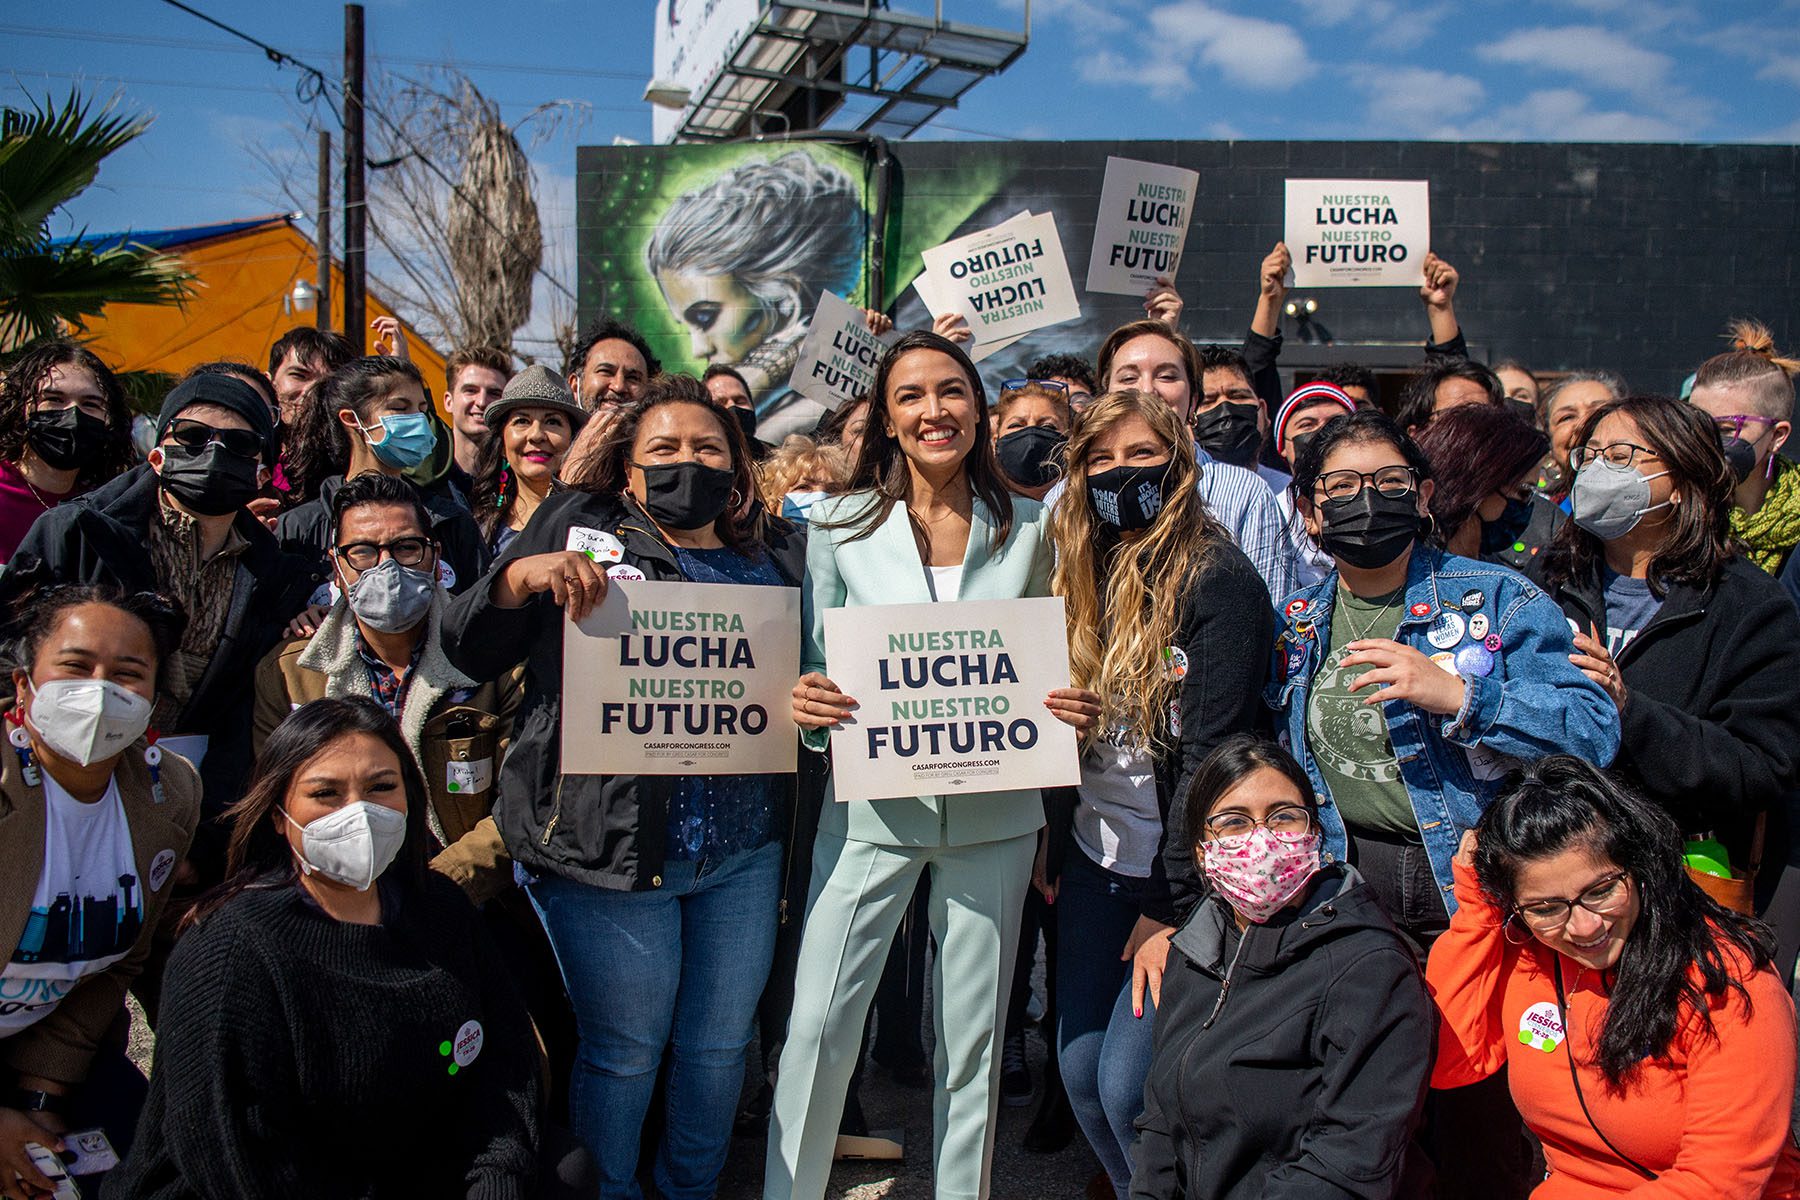 Rep. Alexandria Ocasio-Cortez poses for pictures with supporters.